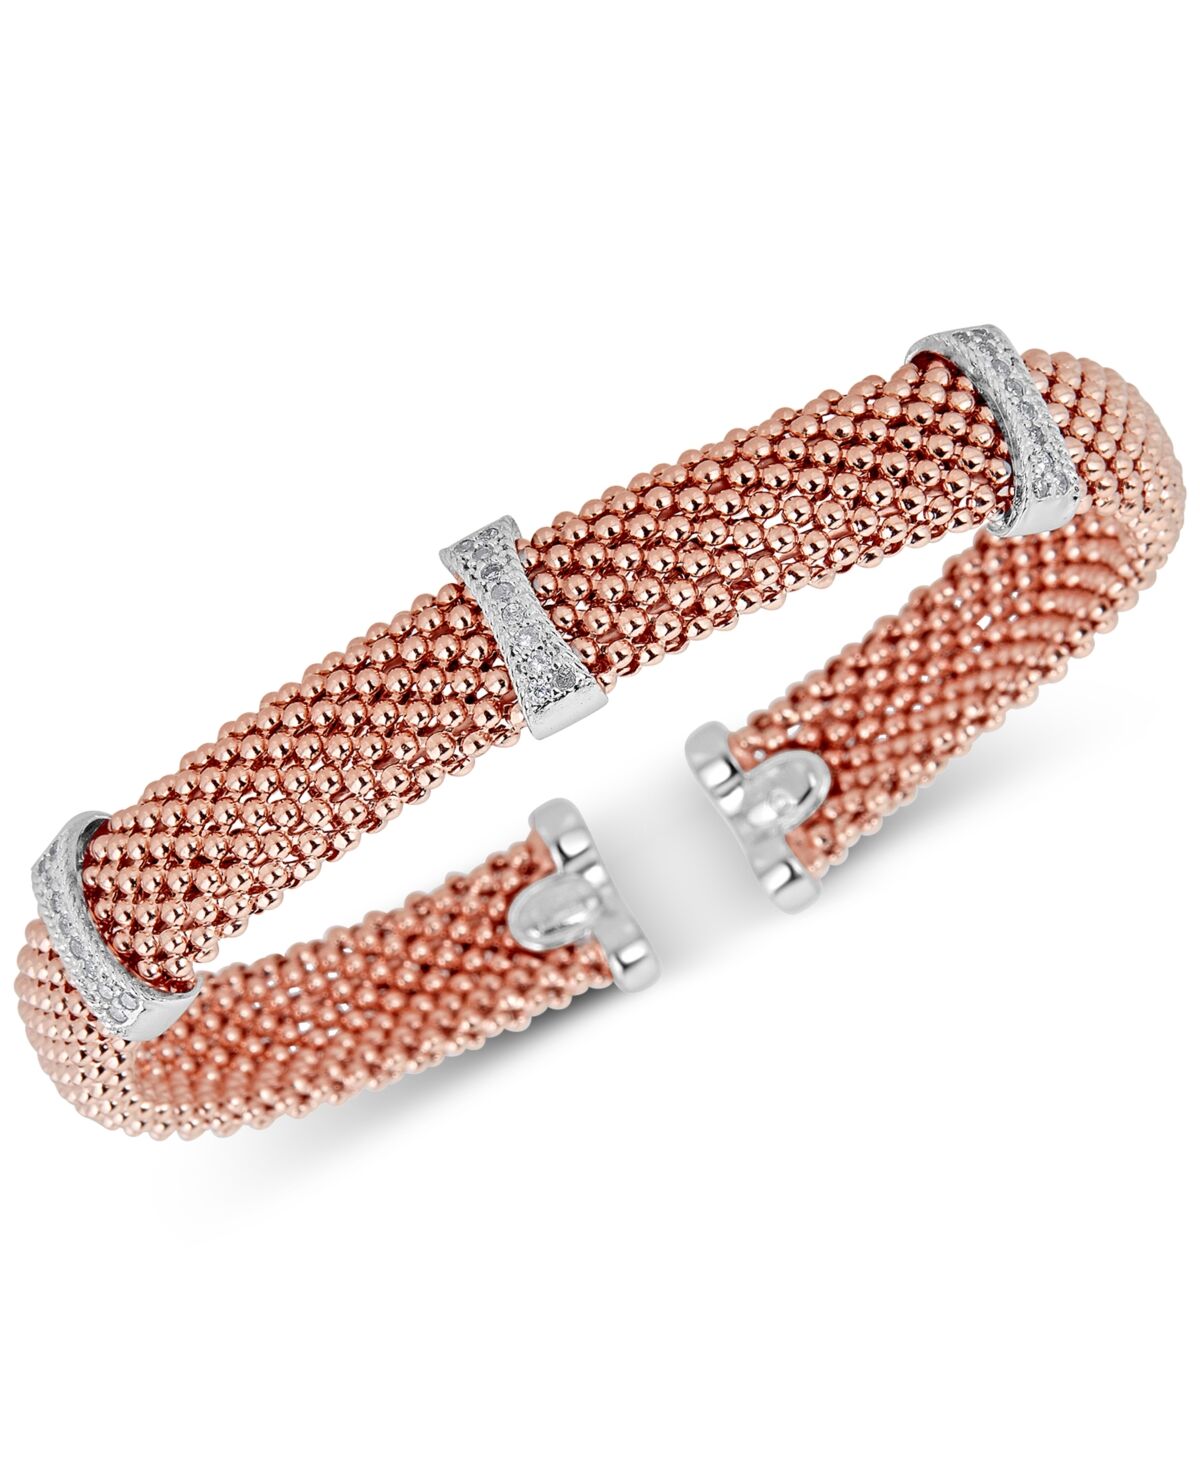 Macy's Diamond Mesh-Look Station Bangle Bracelet (1/4 ct. t.w.) in Sterling Silver & 14k Rose Gold-Plated Sterling Silver - Rose Gold/Silver